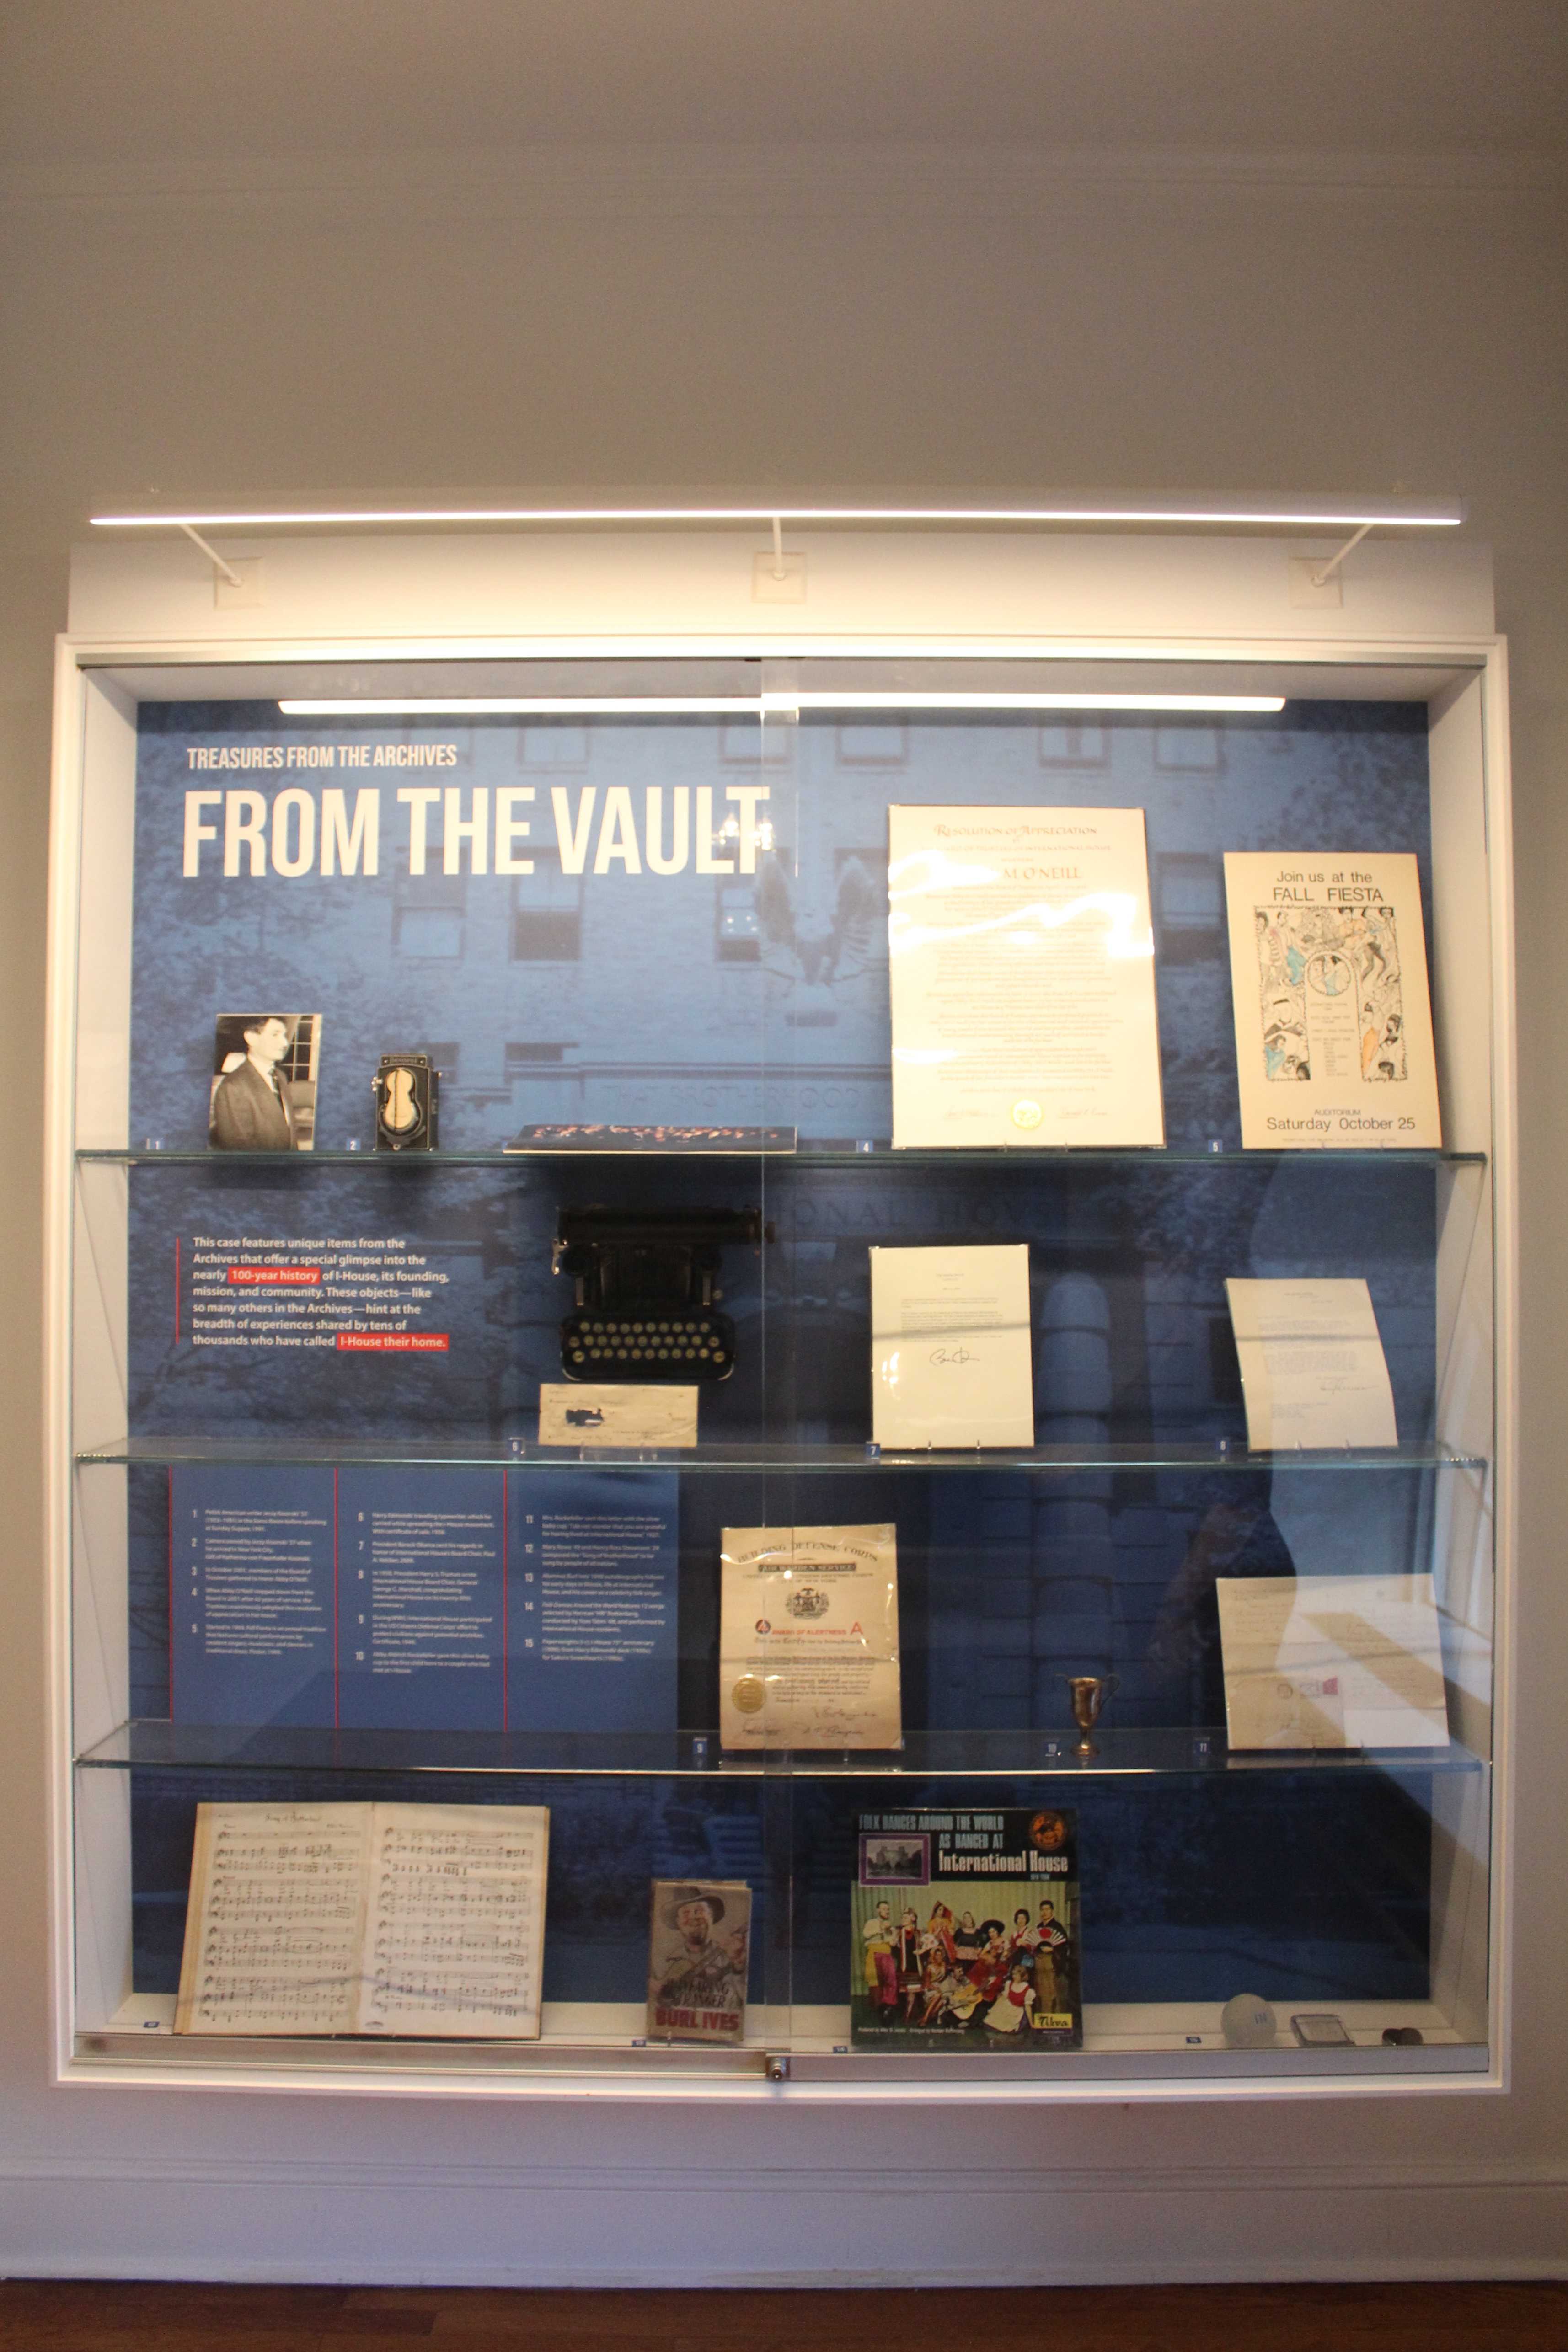 A display of archival artifacts. the Display reads "From the Vault"